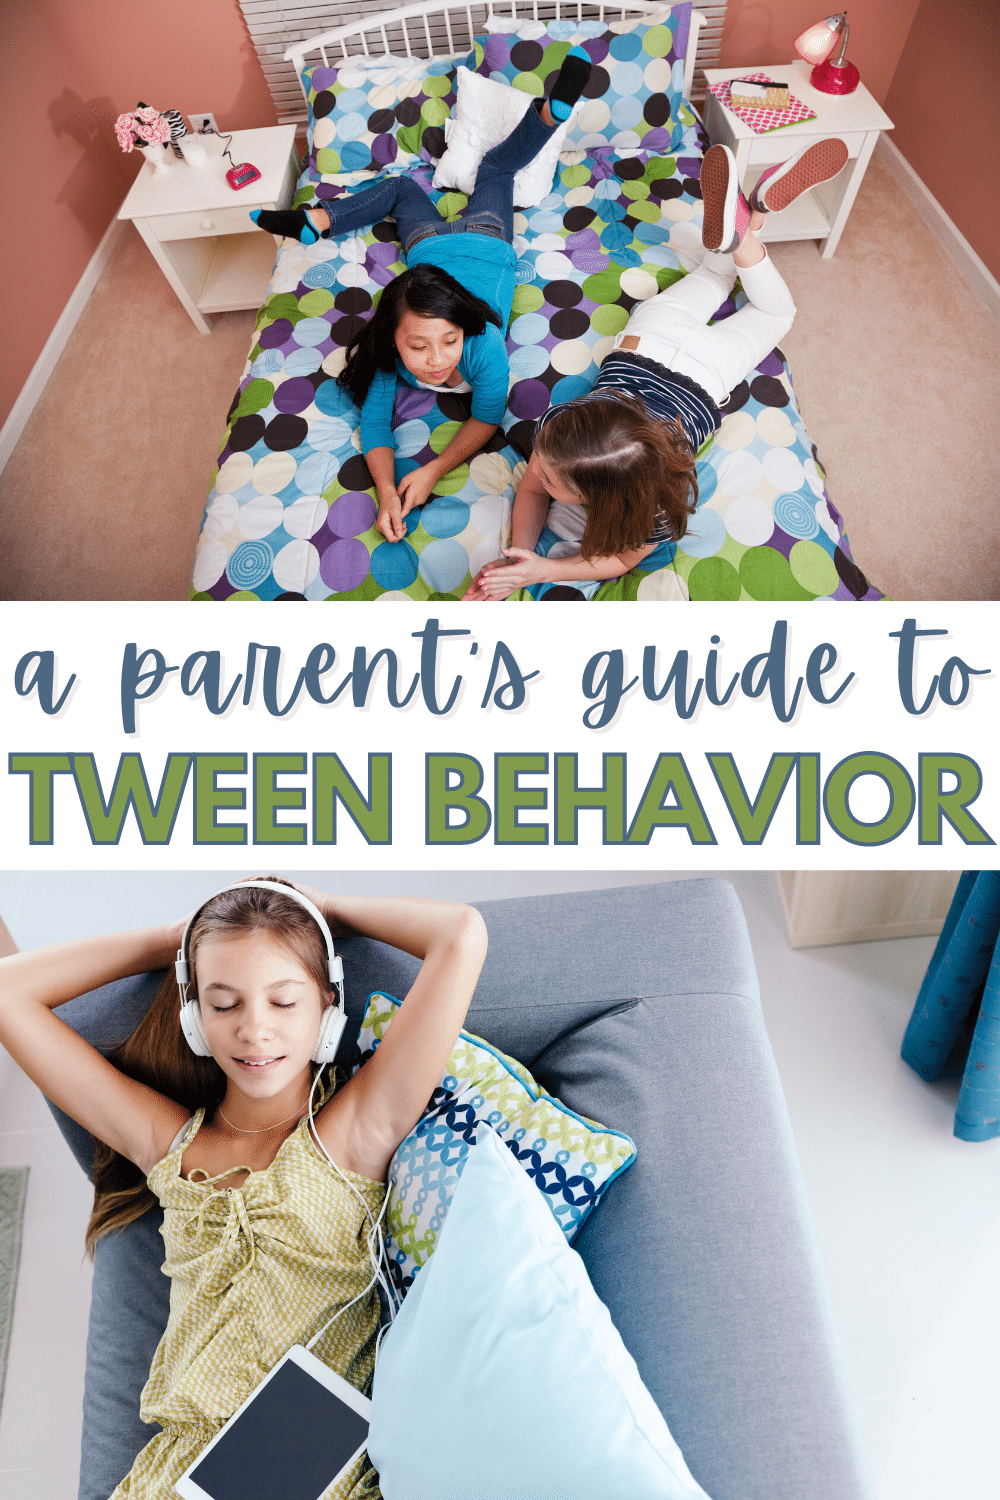 Do you find the tween years to be a difficult parenting challenge? This Parent's Guide to Tween Behavior gives you some helpful tips. #tweenbehavior #tweens #parentingtips via @wondermomwannab